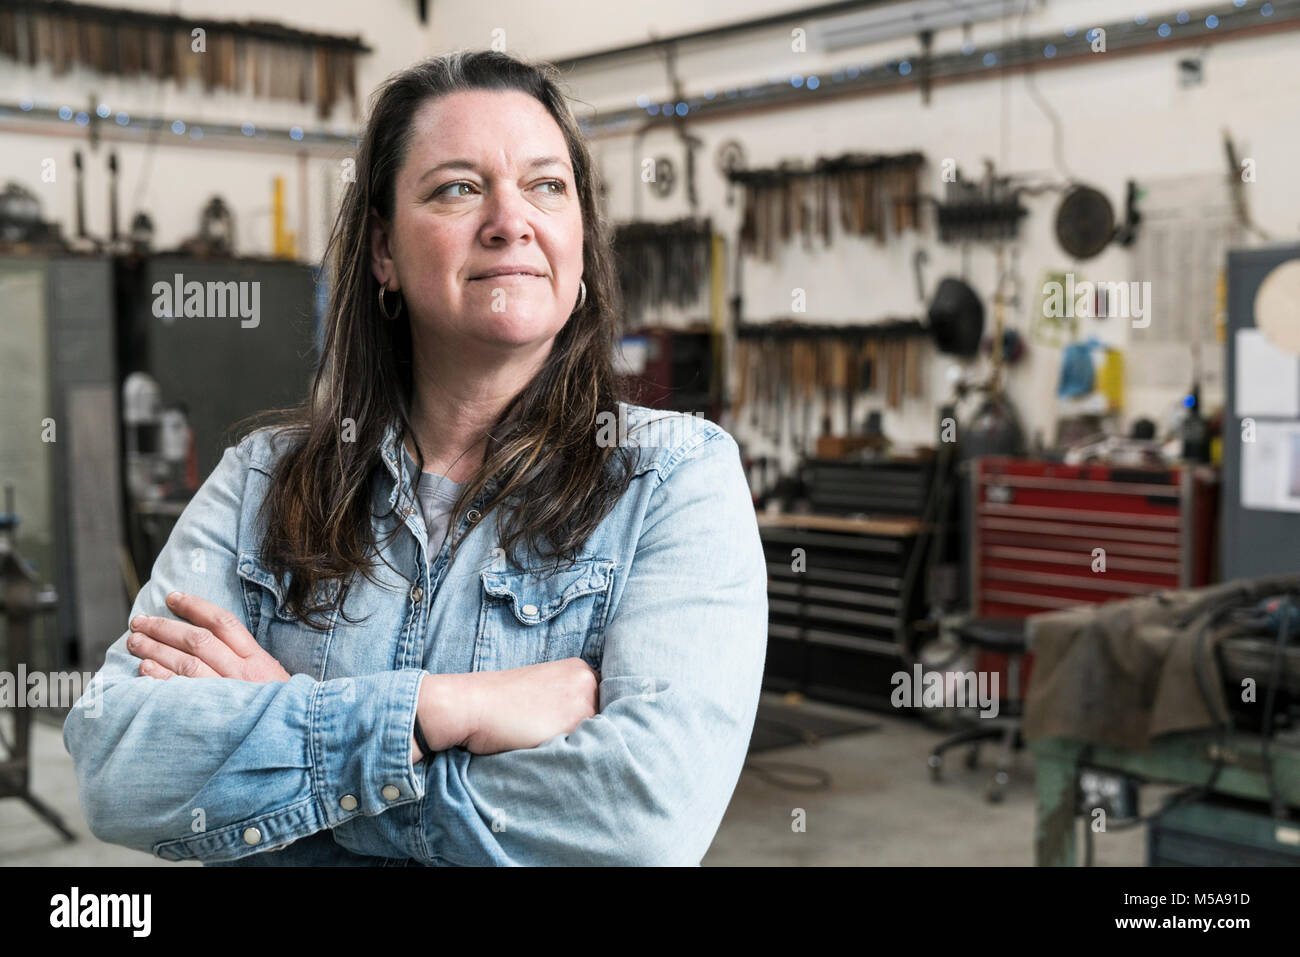 Woman with brown hair wearing Denim shirt standing in metal workshop, arms folded, smiling. Stock Photo